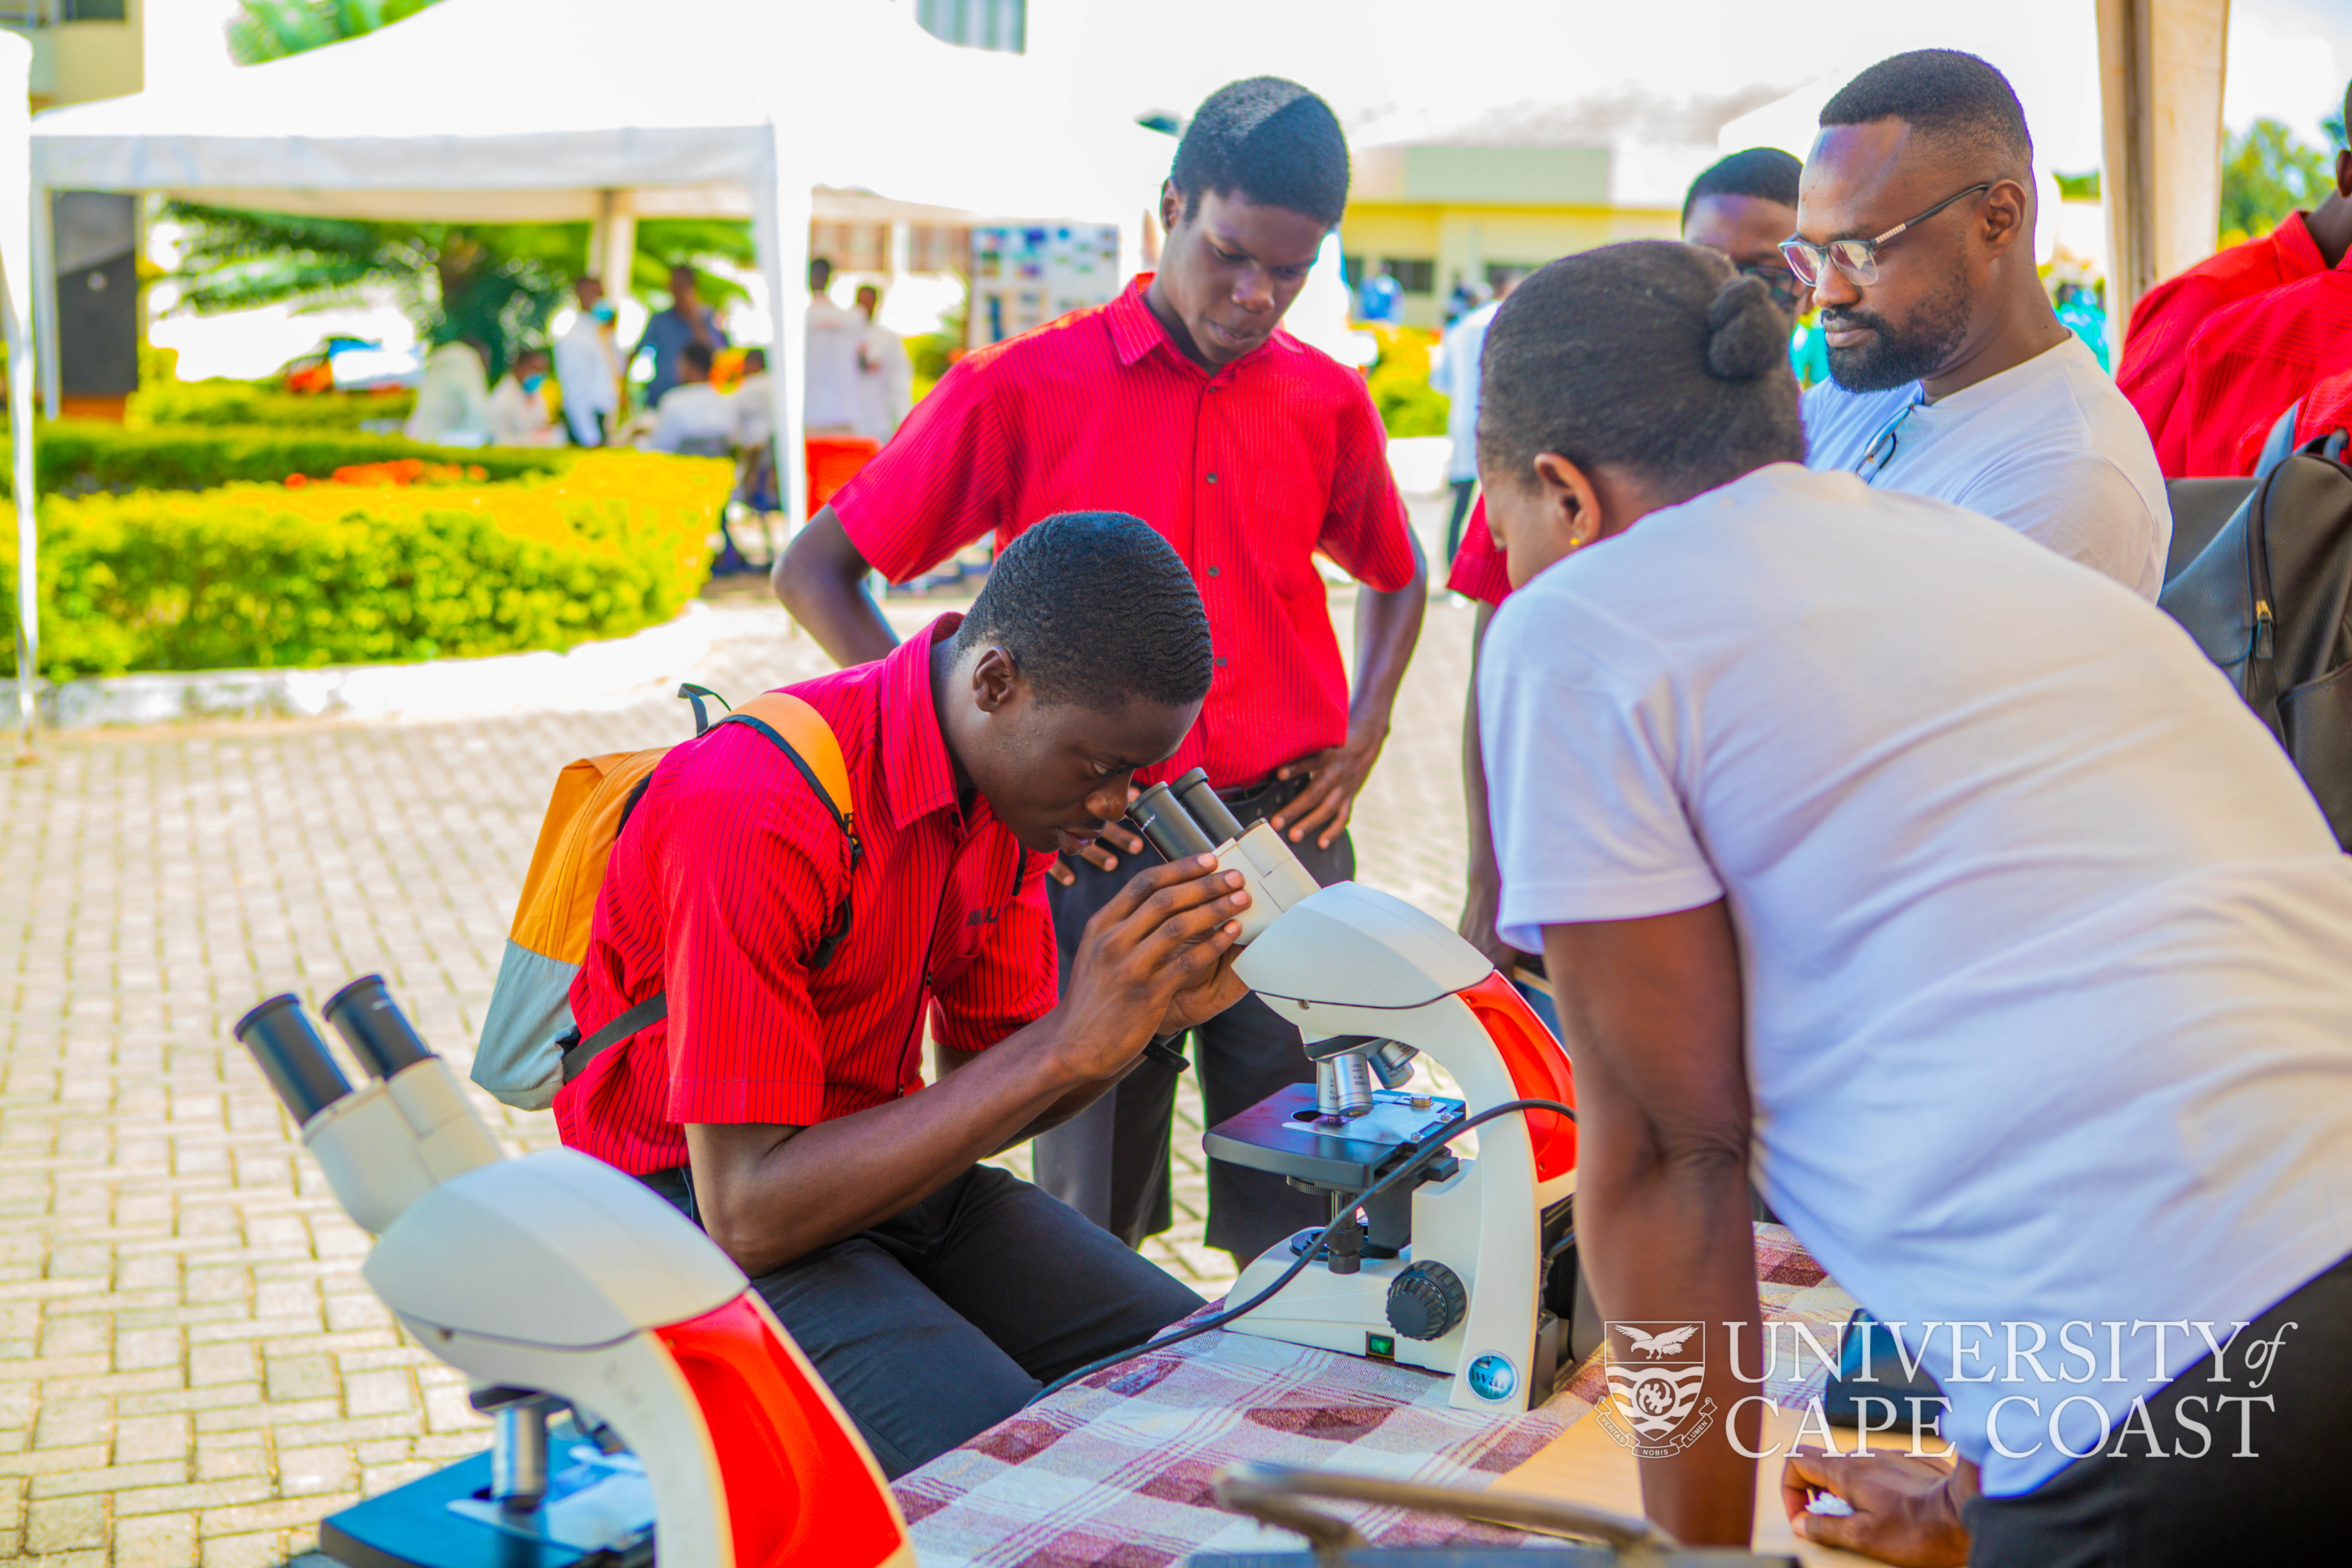 A student of Mfantsipim School having a practical session at one of the stands during the CoHAS Day Exhibition